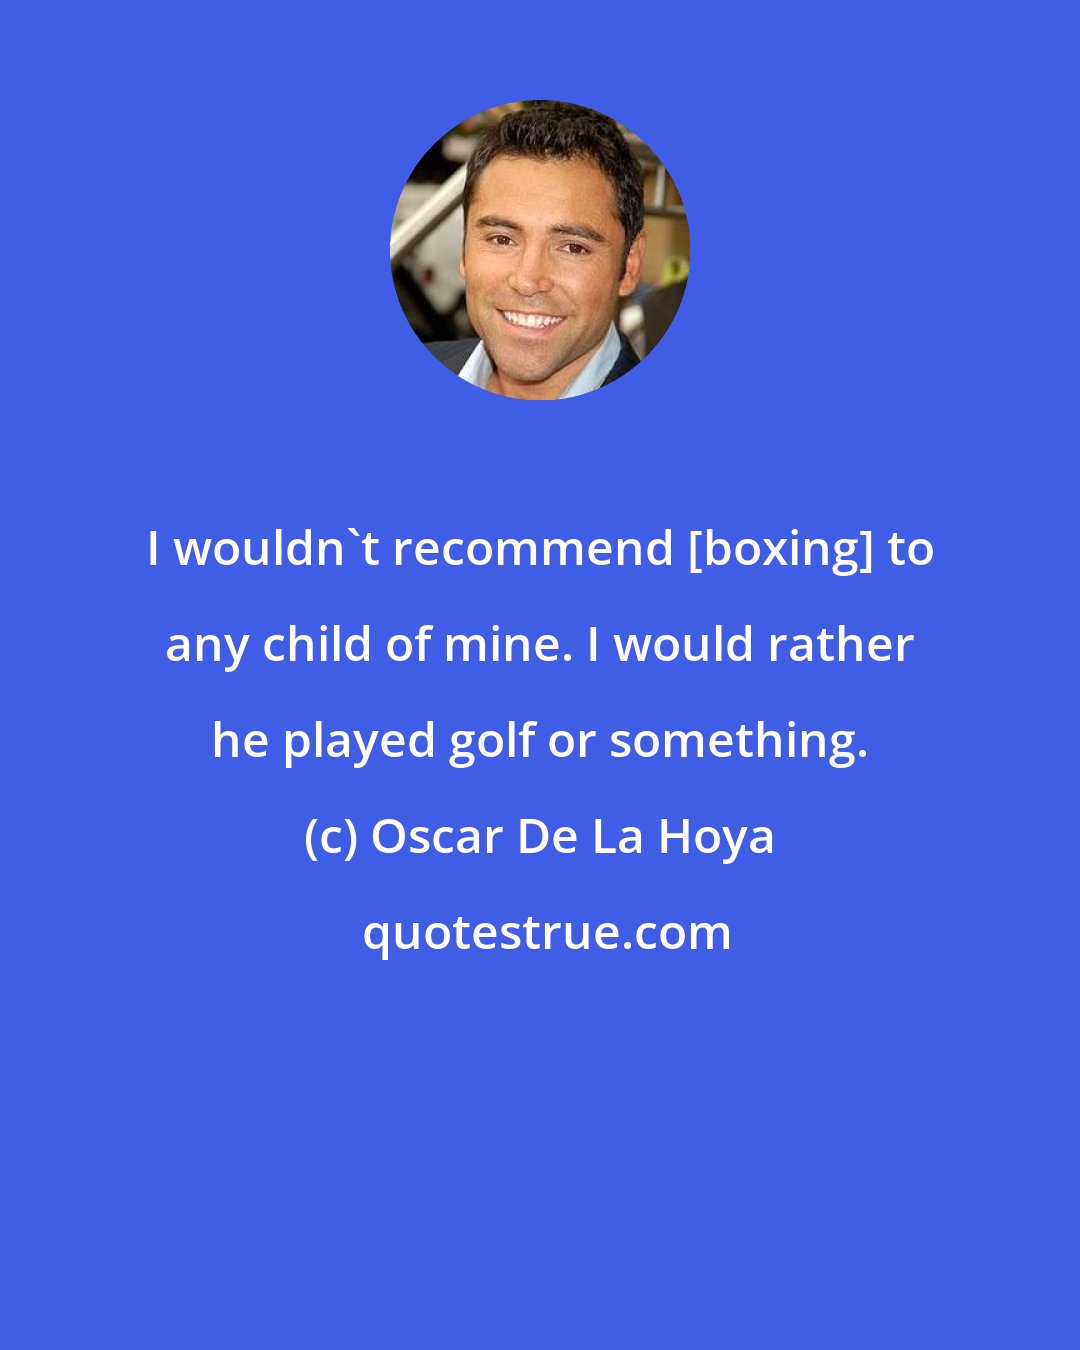 Oscar De La Hoya: I wouldn't recommend [boxing] to any child of mine. I would rather he played golf or something.